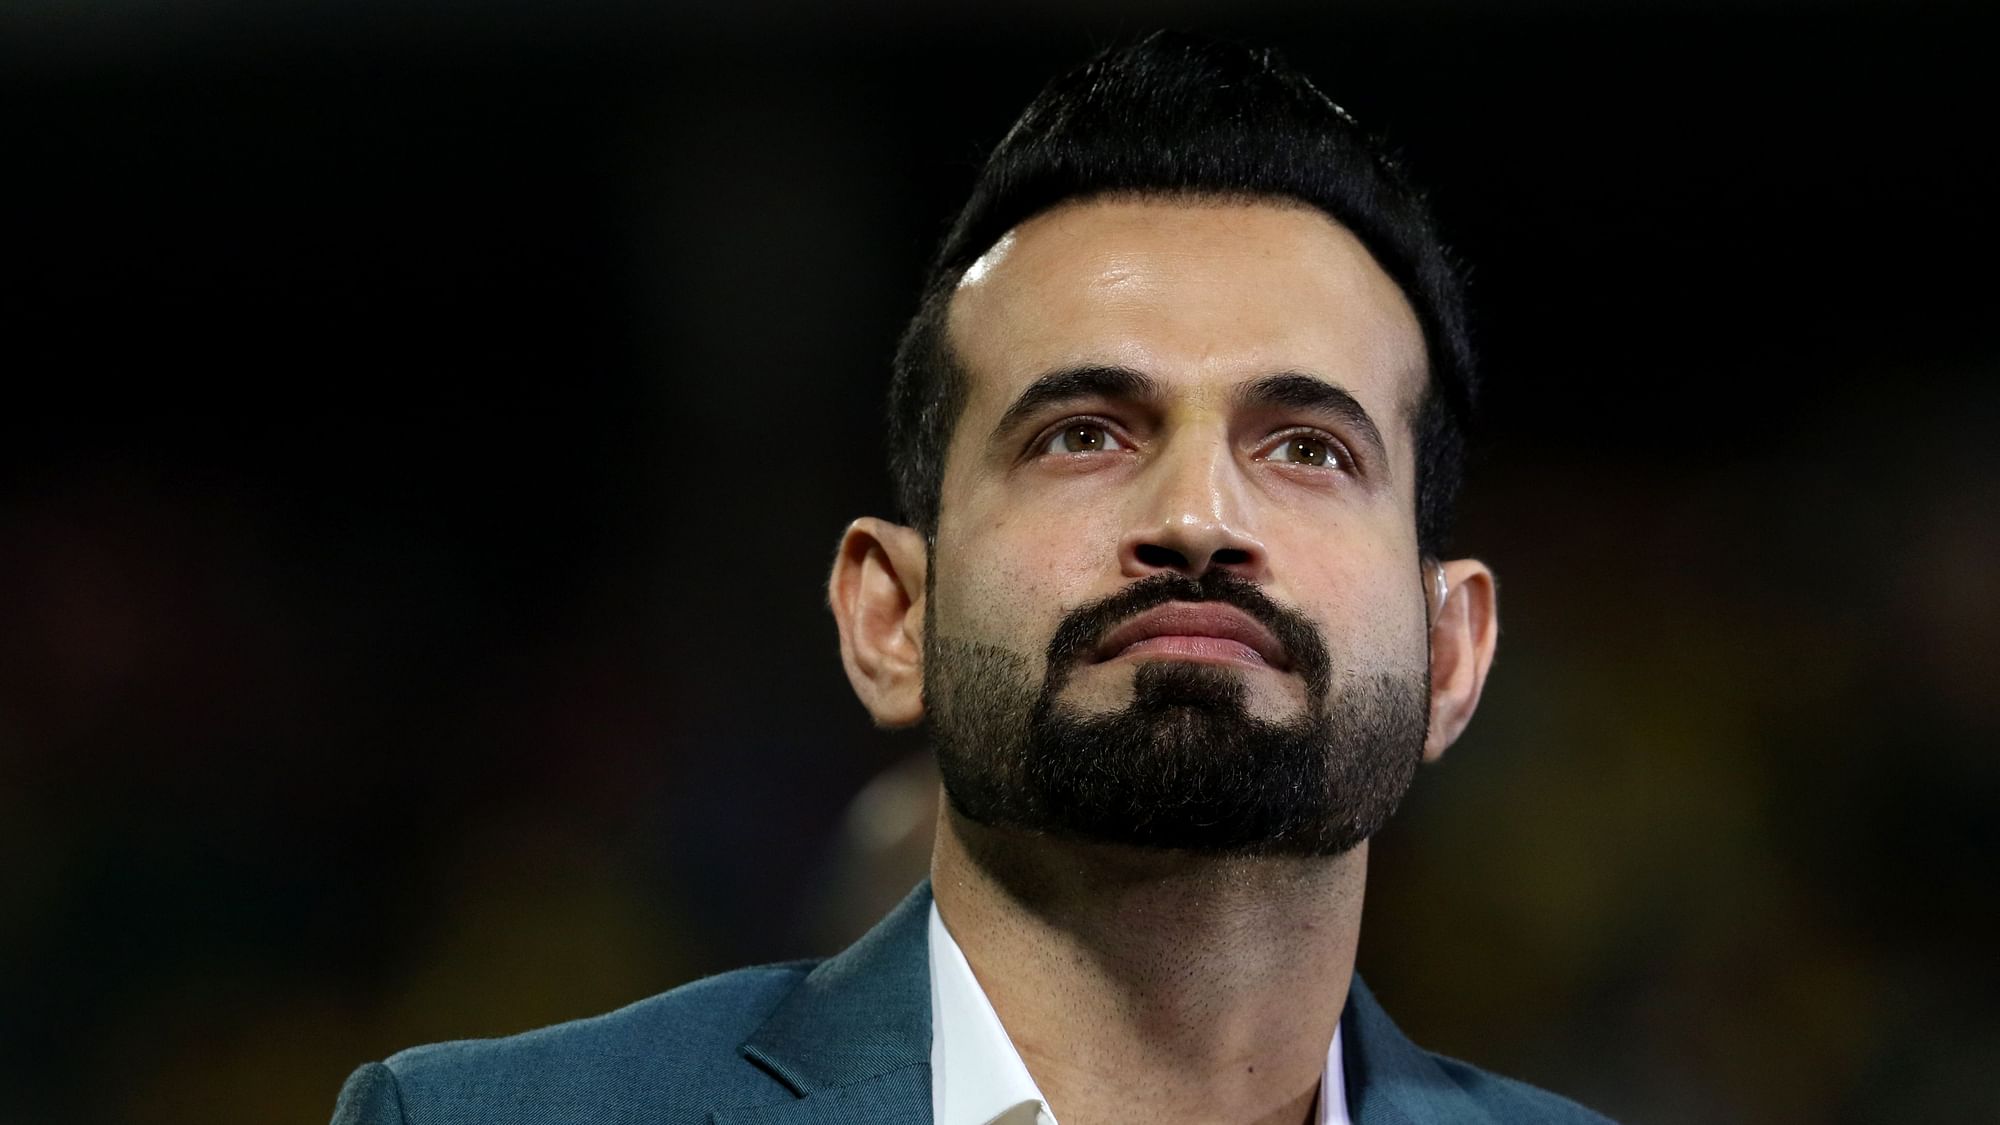 Irfan Pathan has tested positive for COVID-19